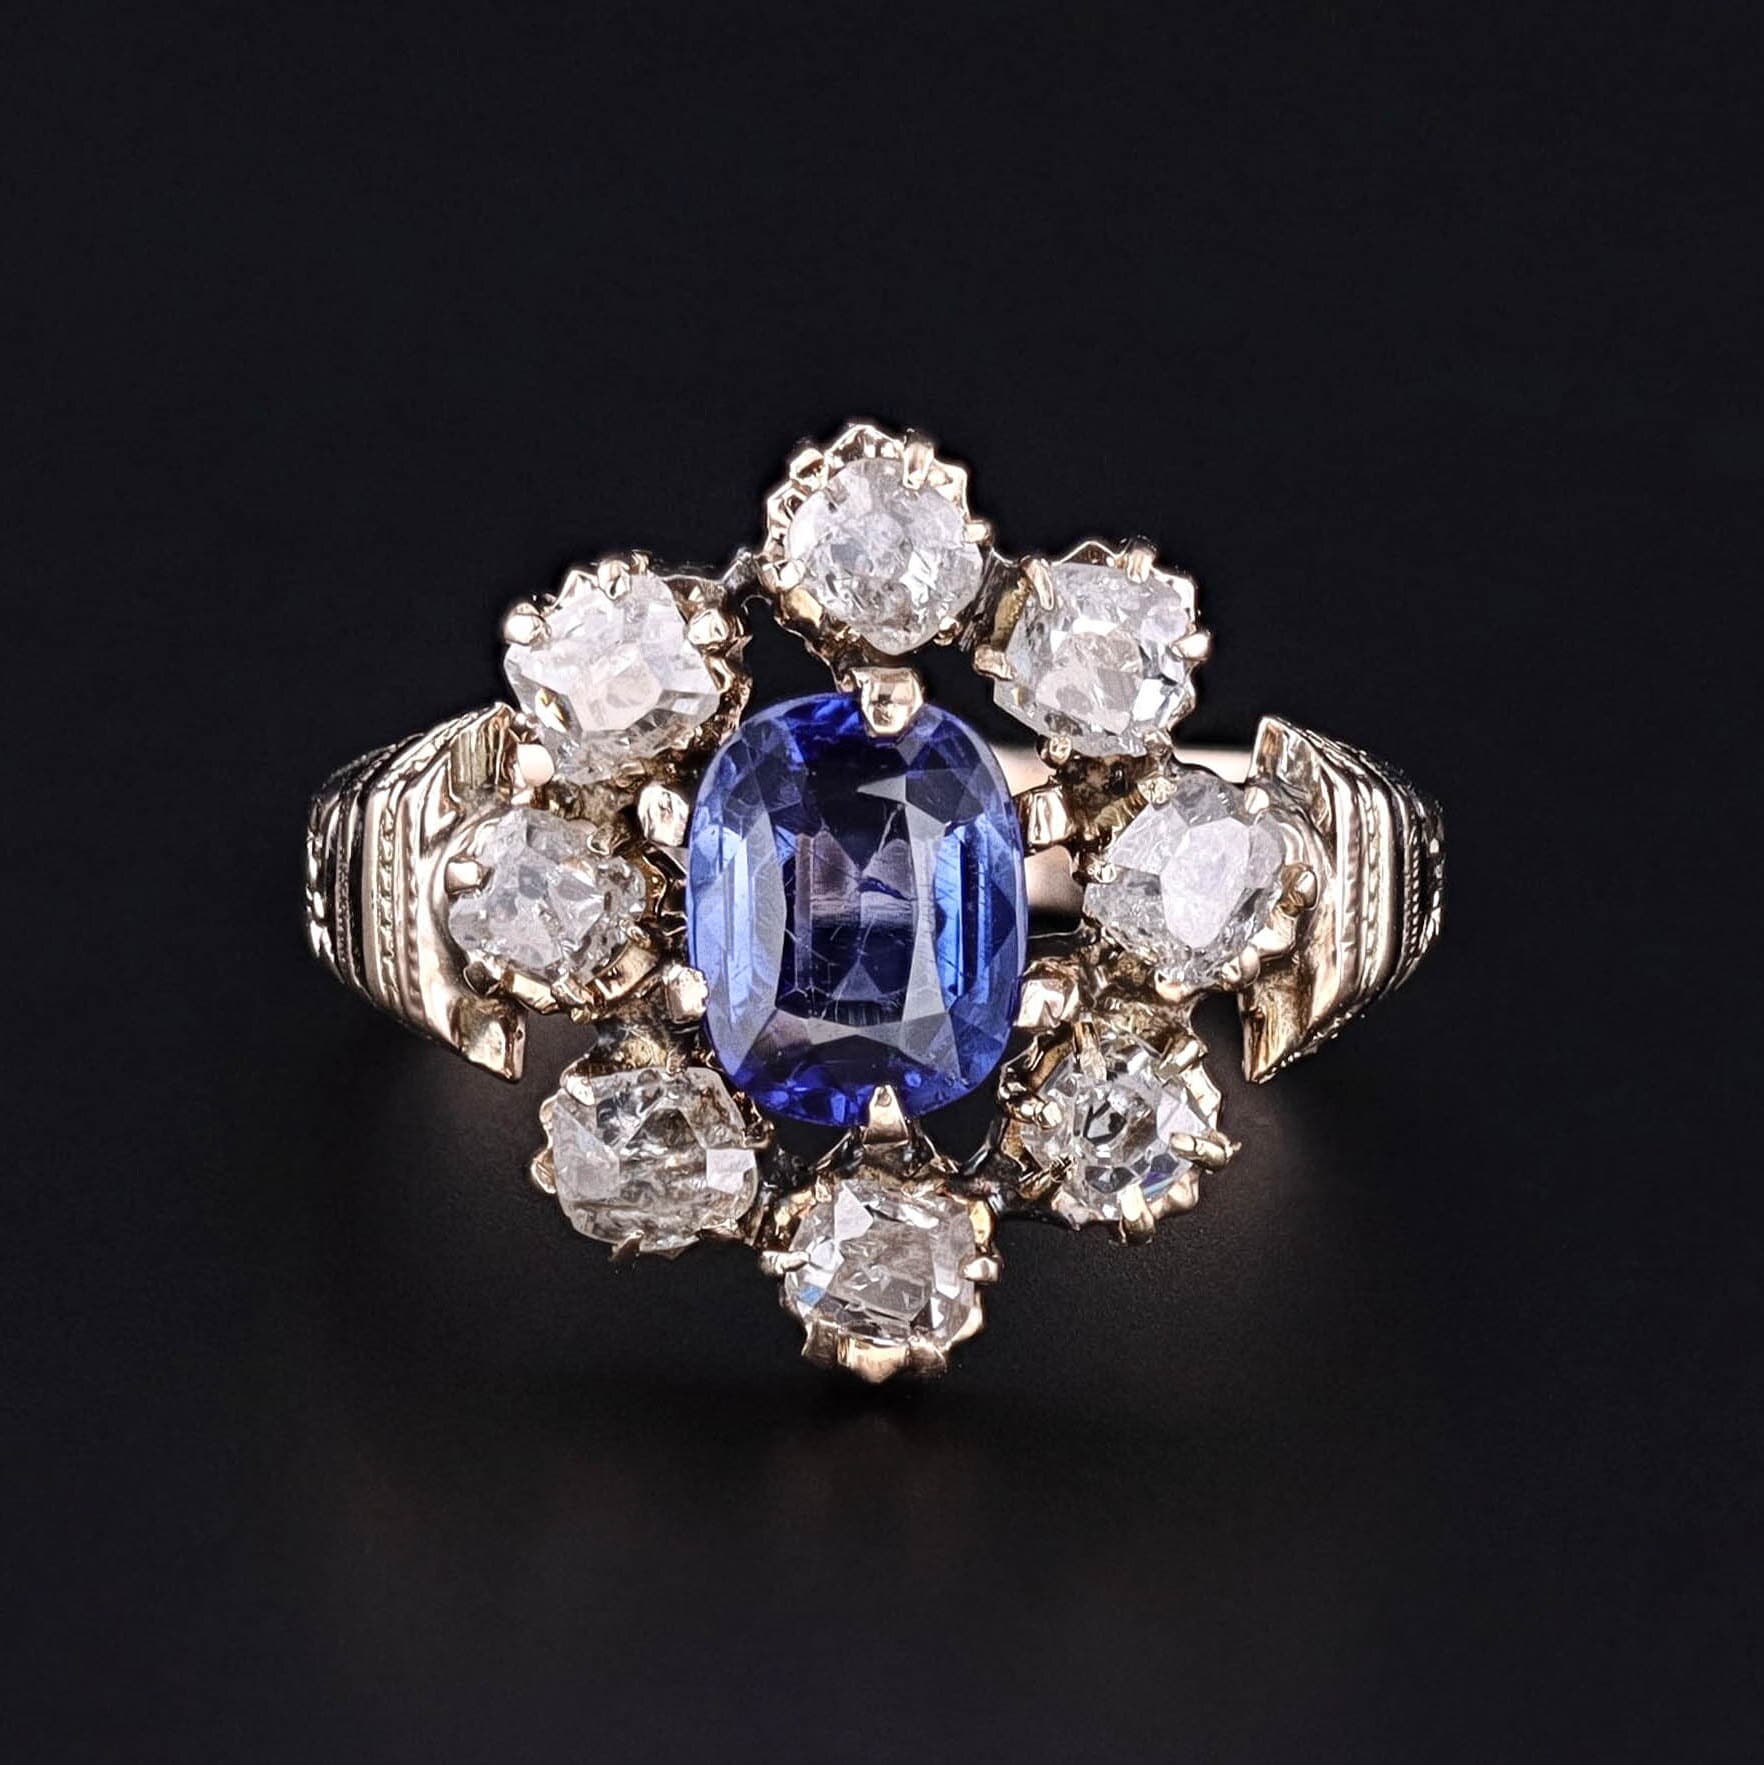 A late Victorian era ring (circa 1880-1900), showcasing a striking synthetic blue sapphire encircled by a halo of old mine cut diamonds. The ring is 12ct gold with black enamel accents.